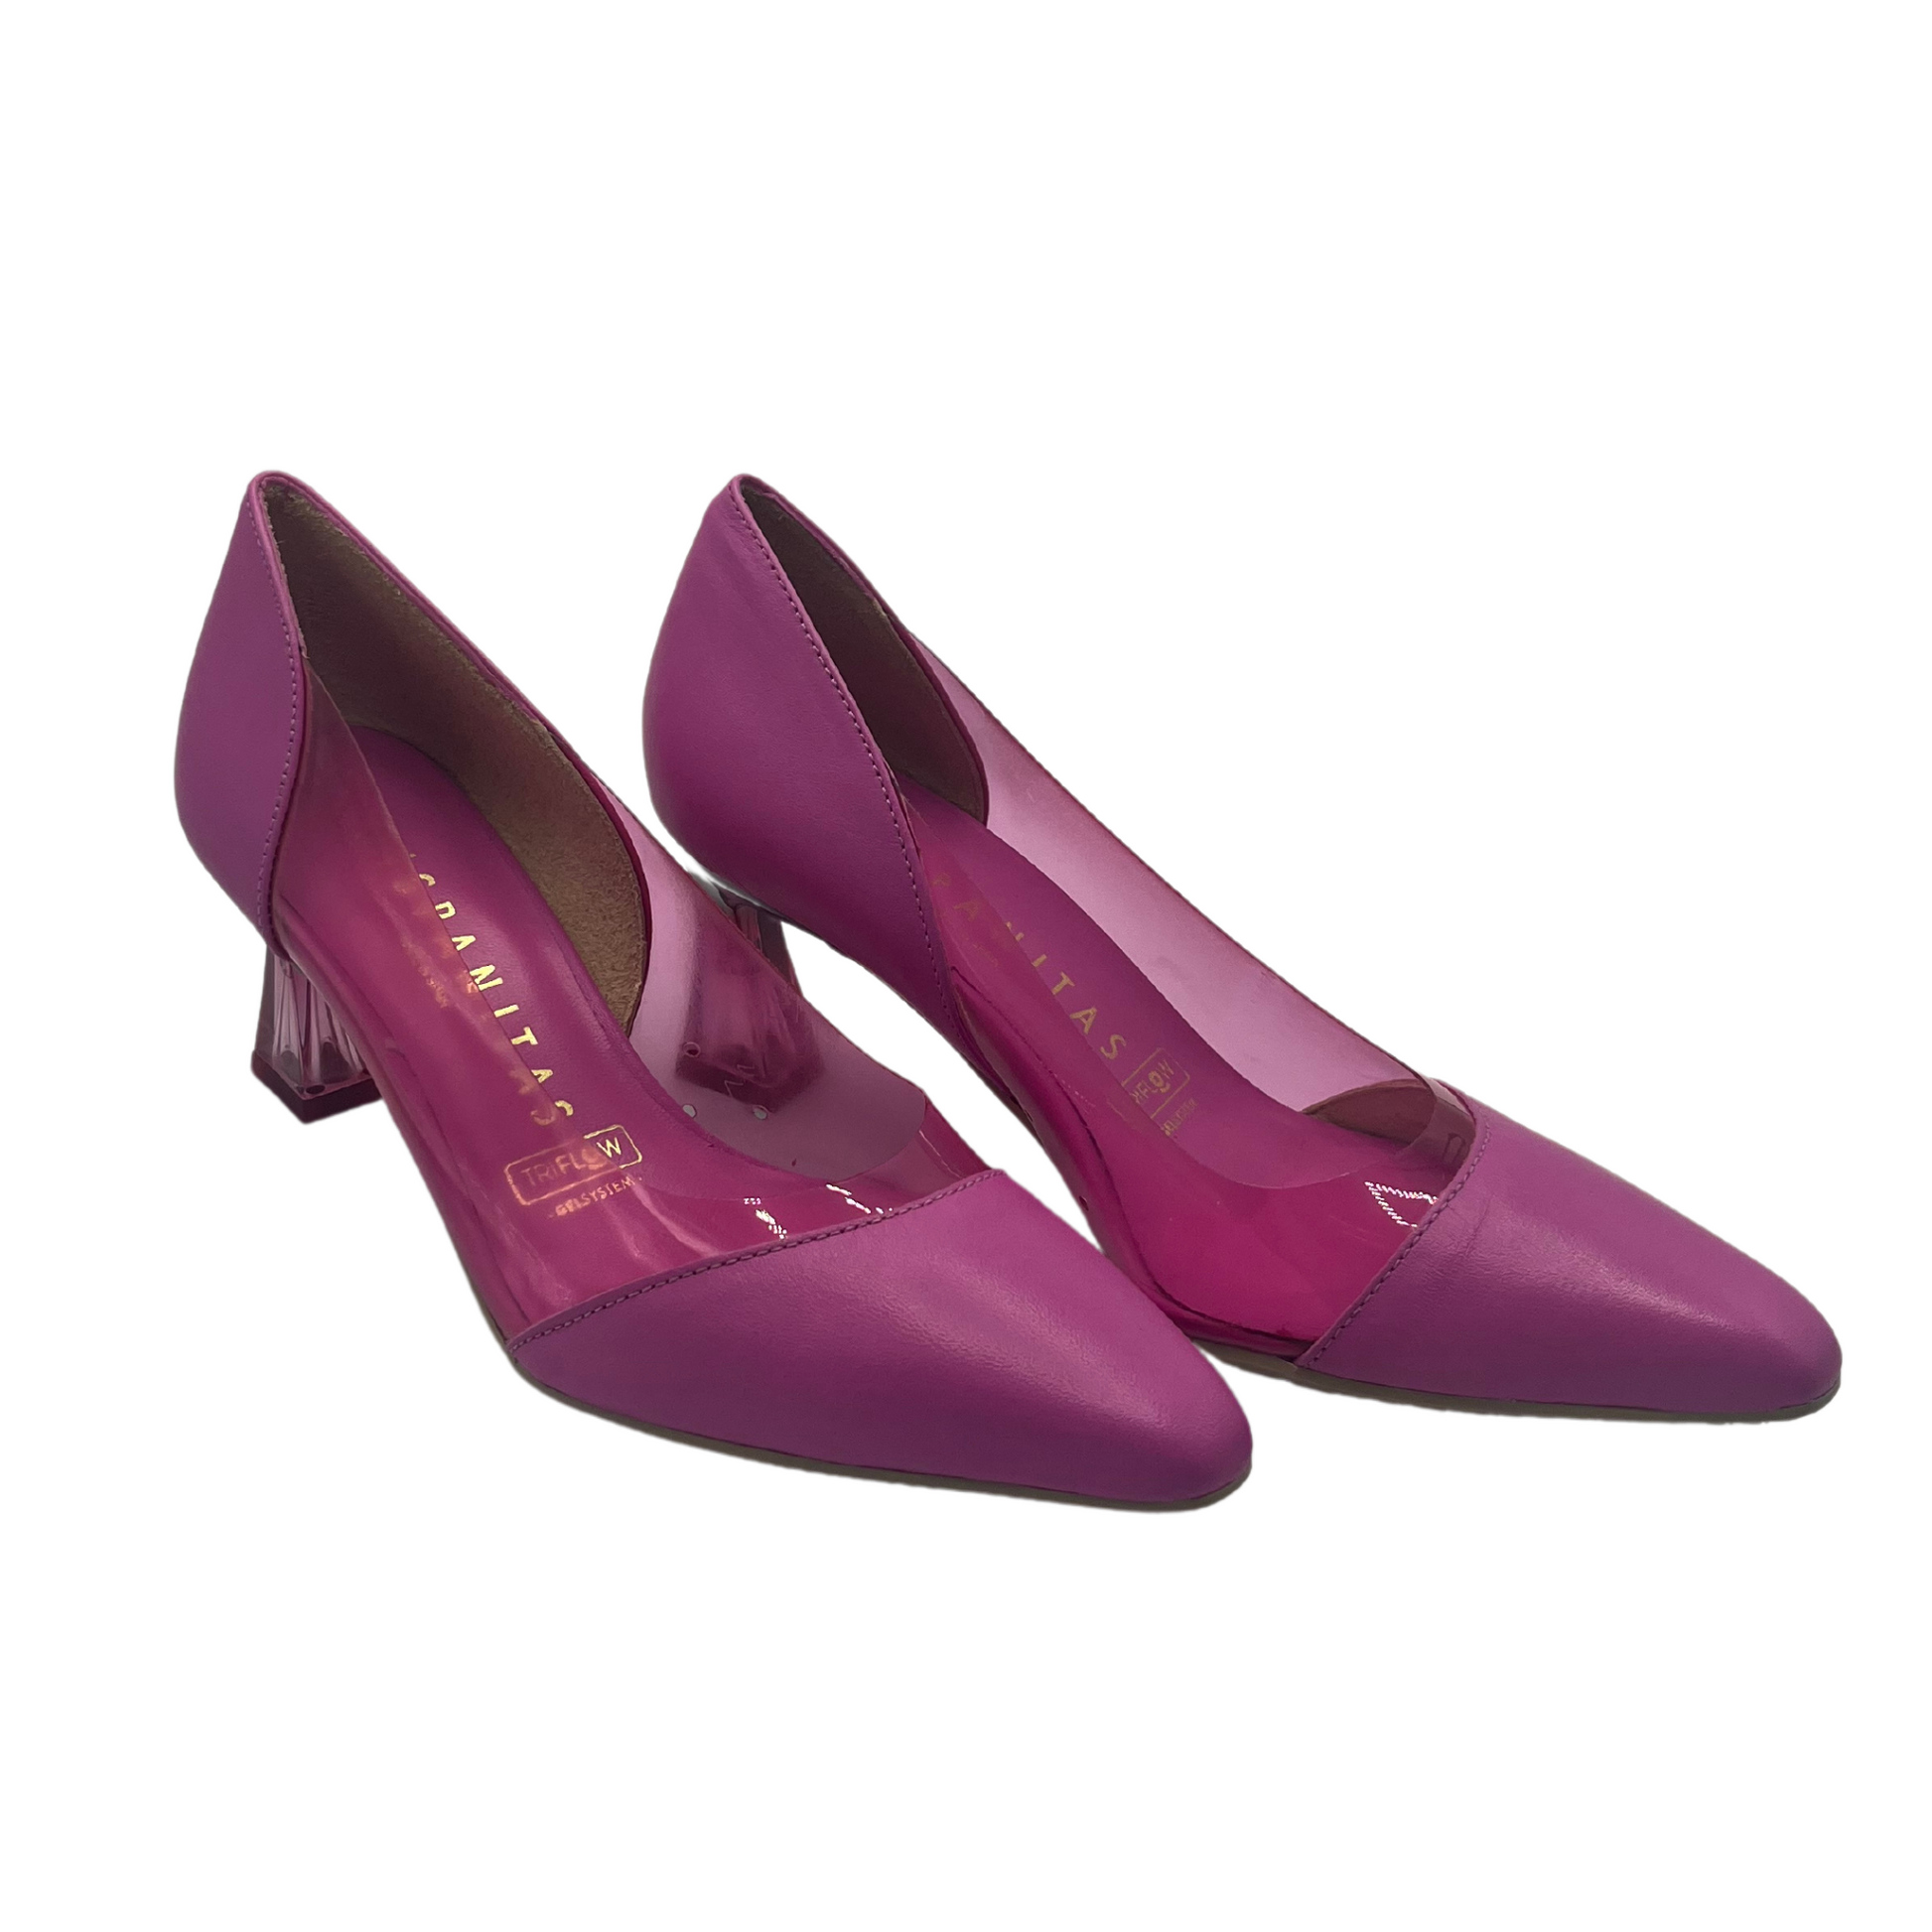 45 degree angled view of a pair of pink leather and vinyl pumps with pointed toes